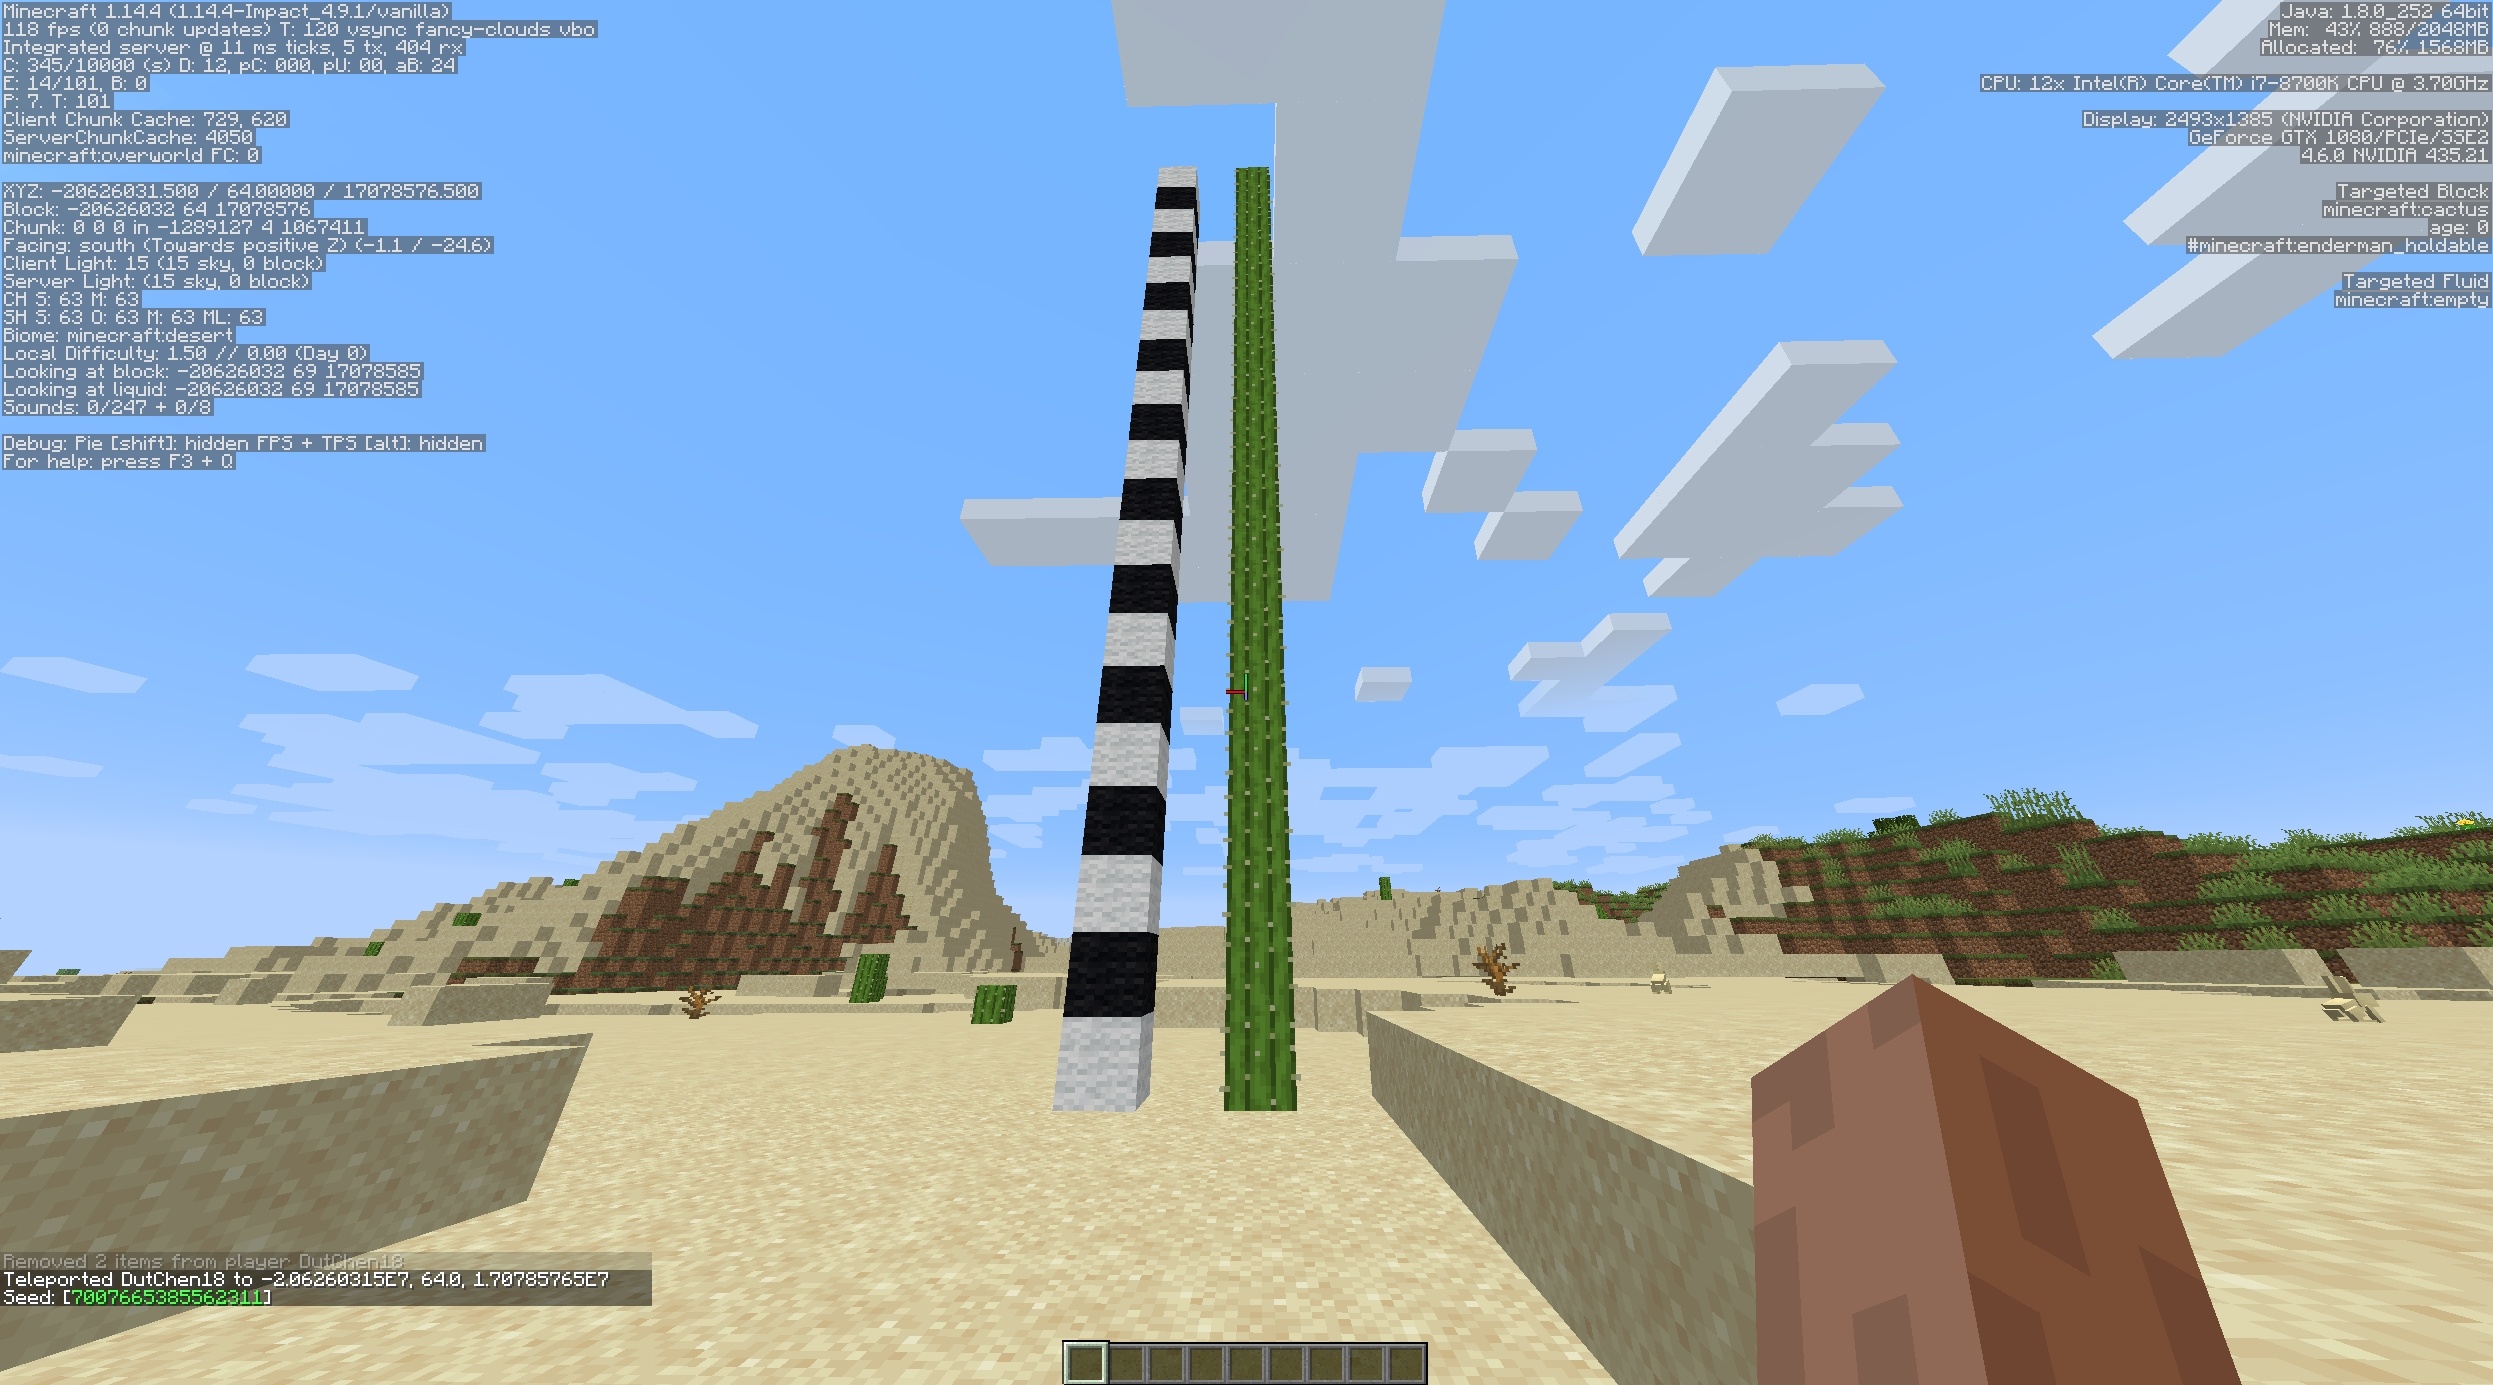 A 21 block tall cactus in a desert with F3 coordinates and seed